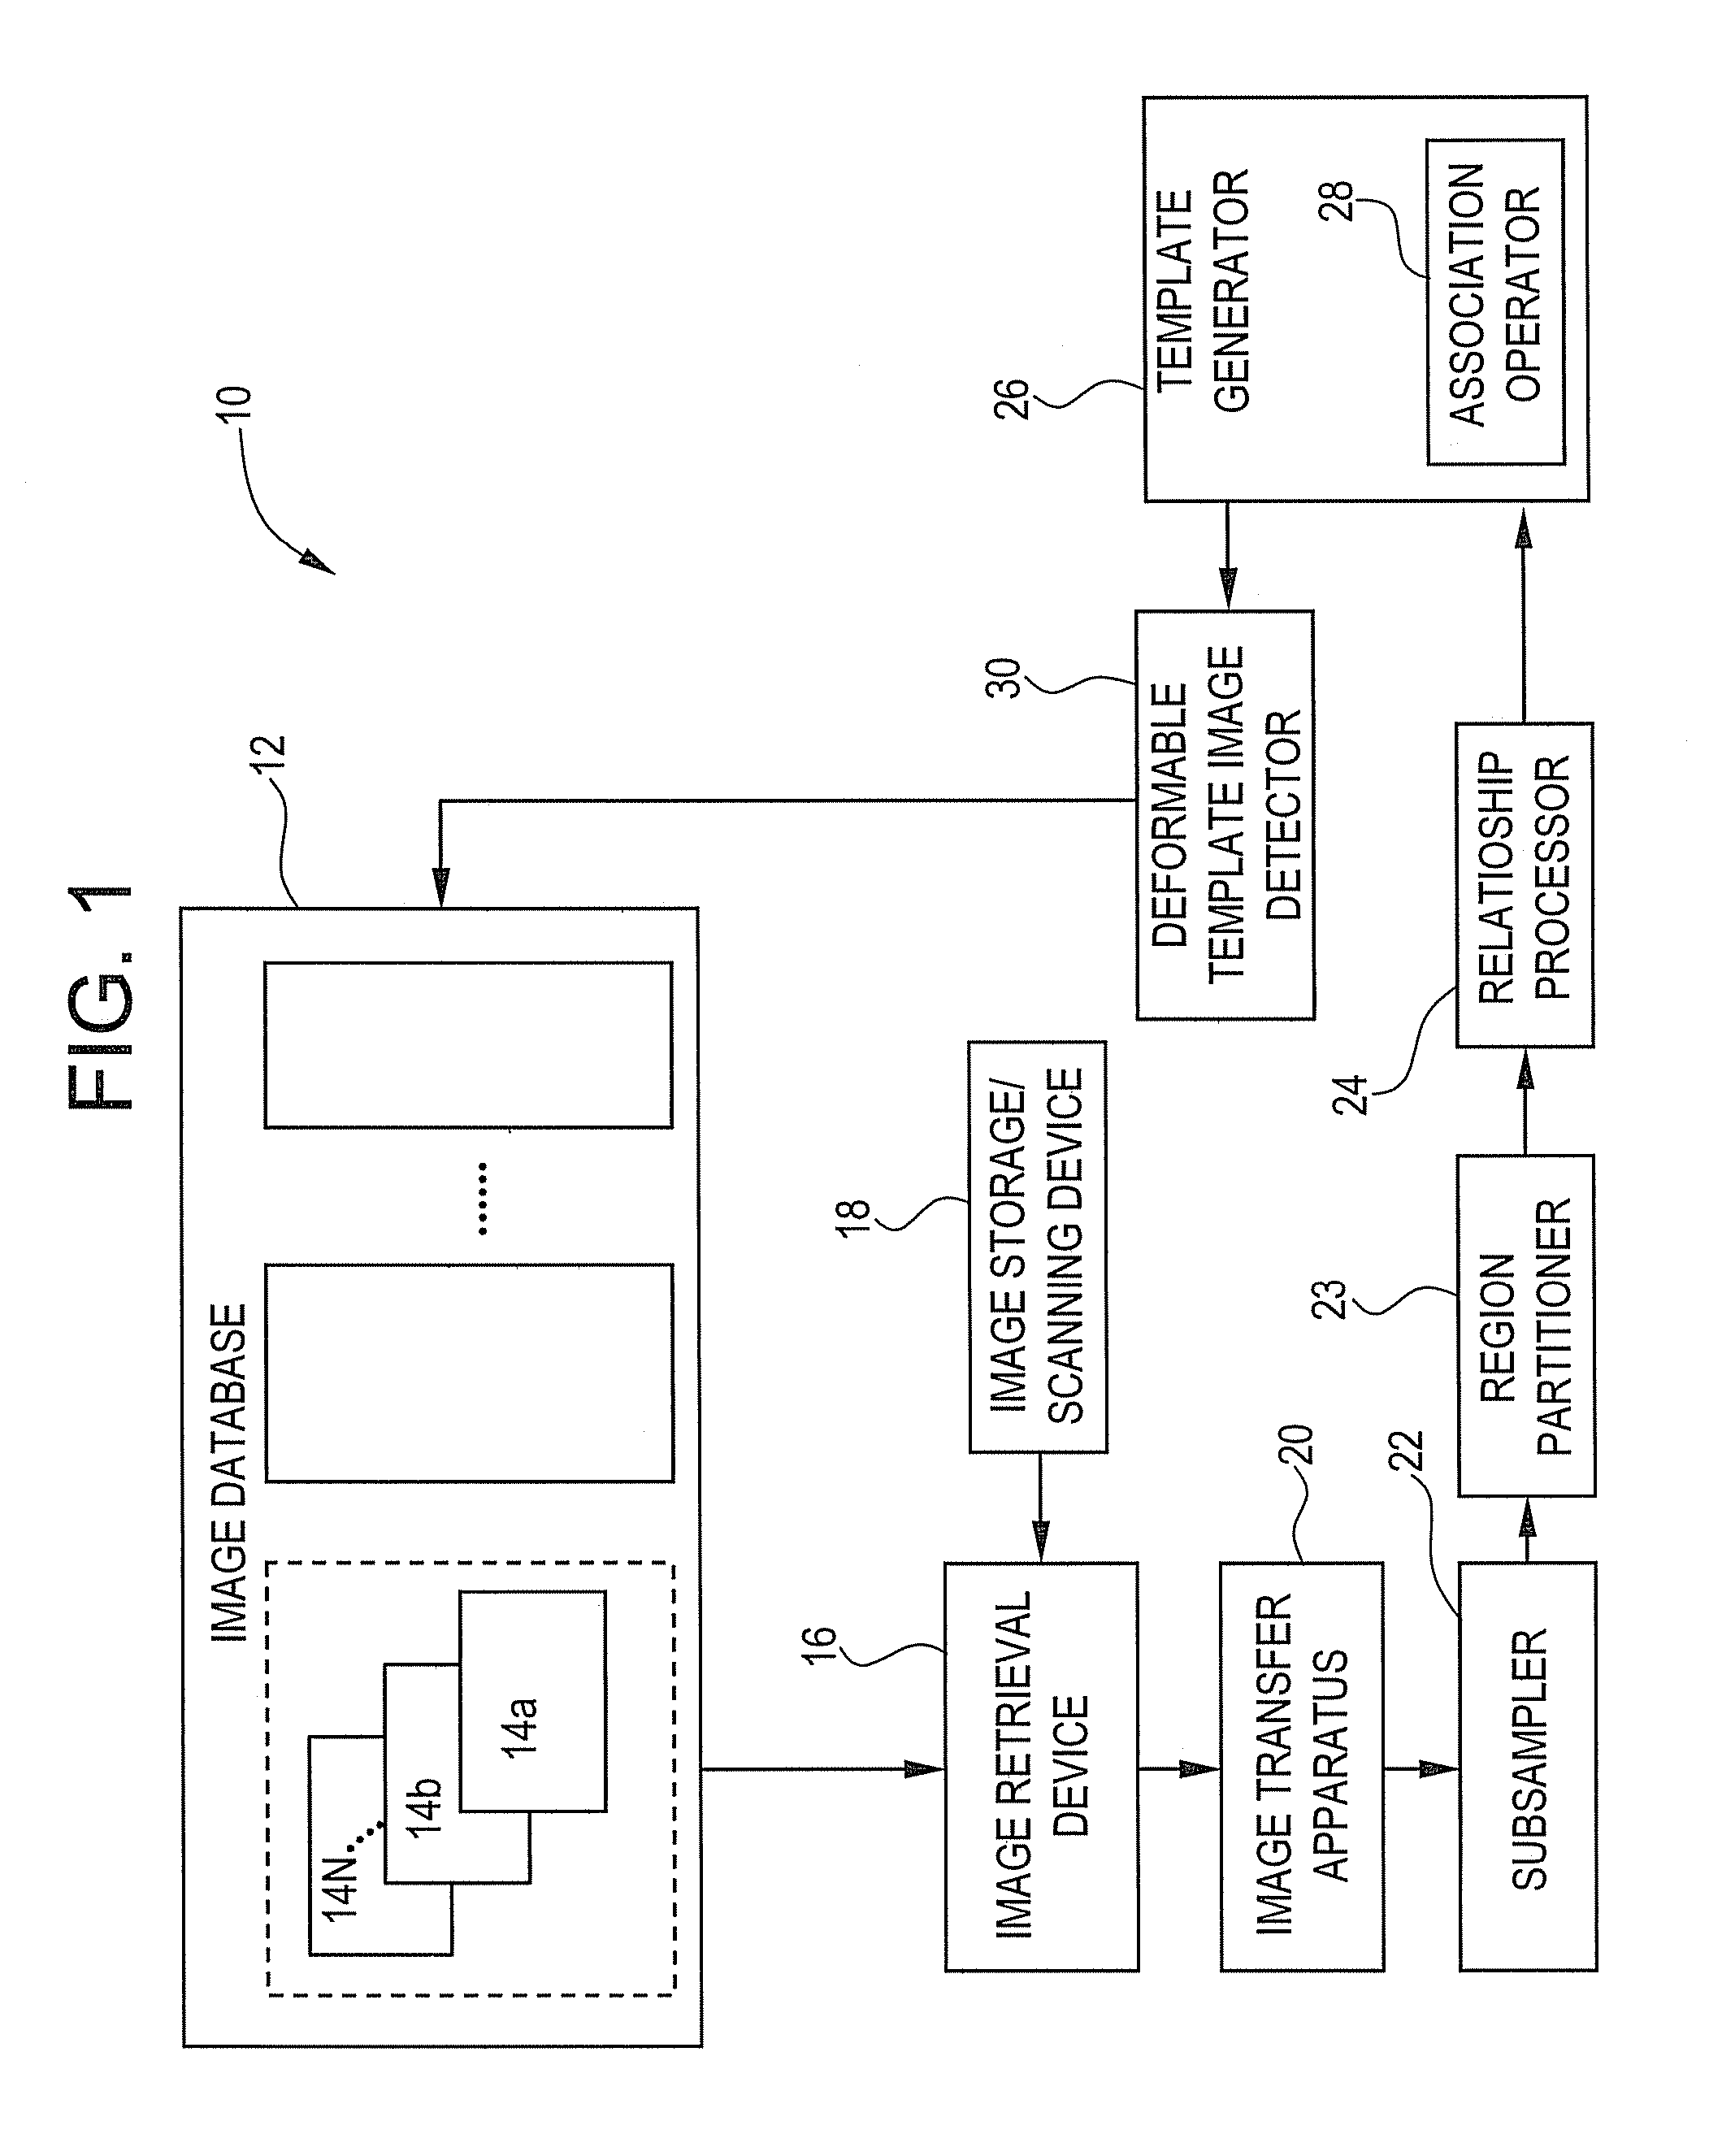 Methods and systems for selecting an image application based on image content